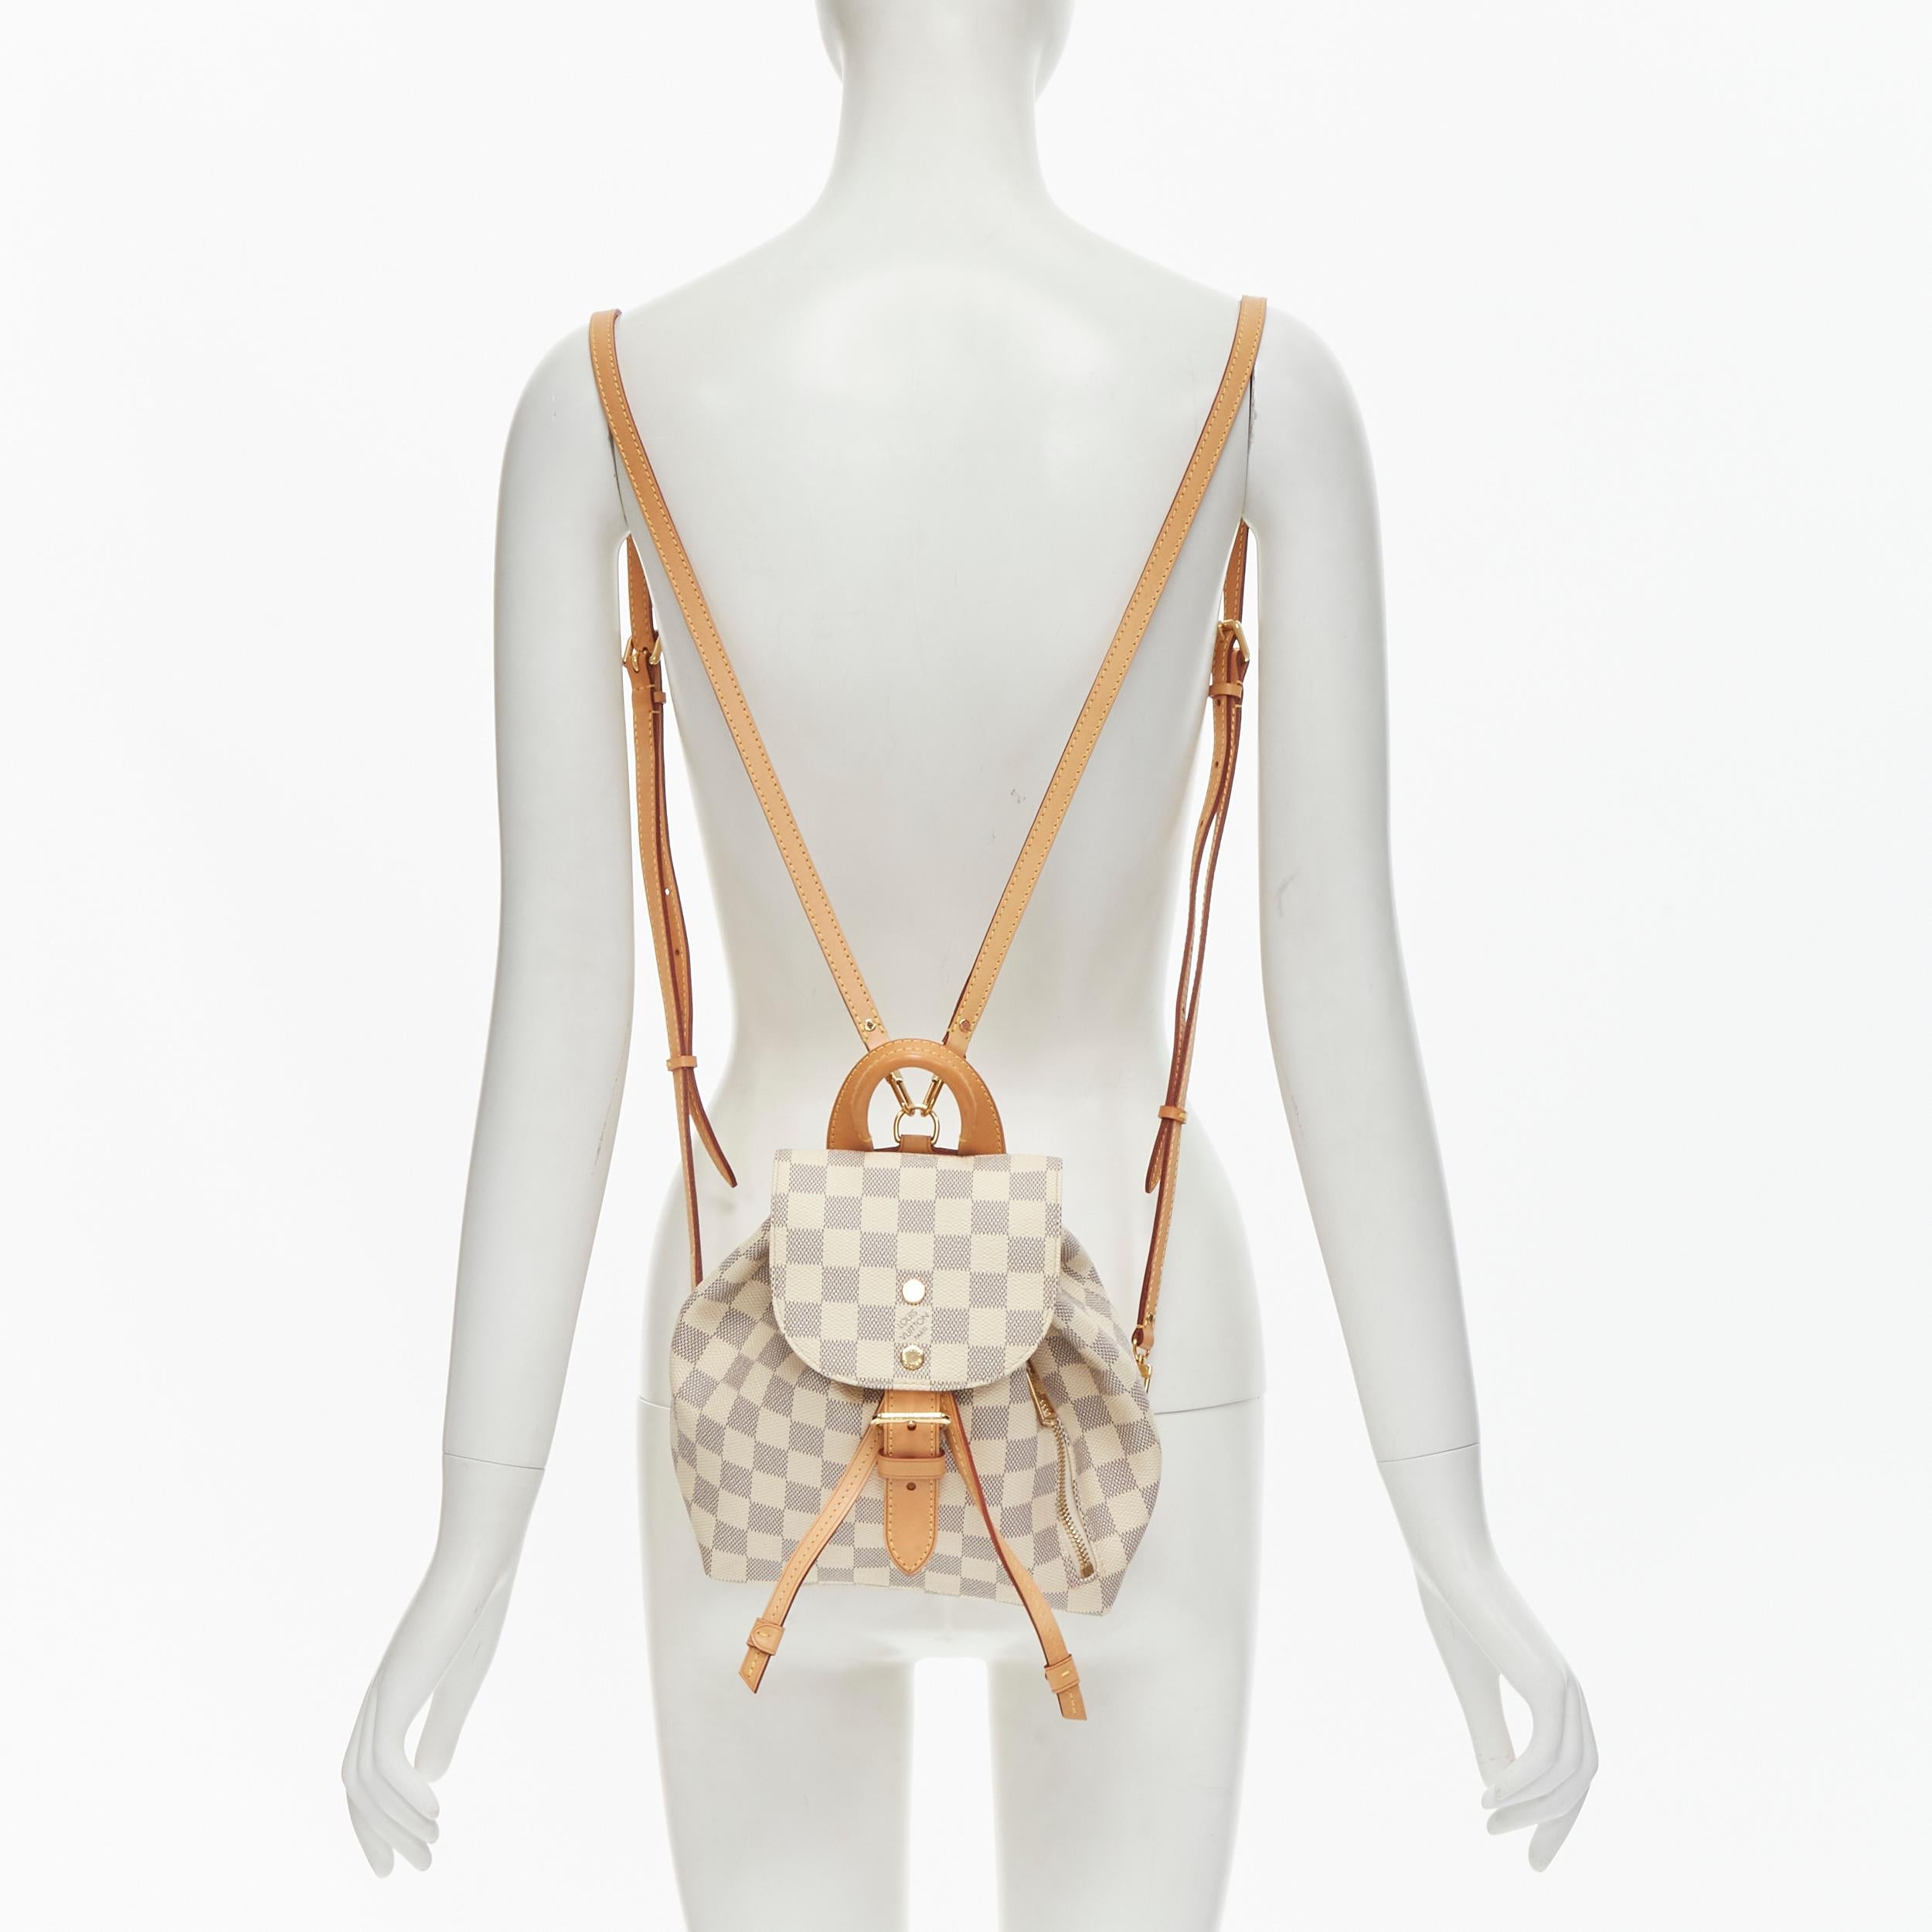 LOUIS VUITTON Damier Azur Sperone BB white checked backpack 
Reference: CECU/A00001 
Brand: Louis Vuitton 
Model: Damier Azur Sperone BB 
Collection: 2020 
Material: Canvas 
Color: White 
Pattern: Checked 
Closure: Drawstring 
Extra Detail: From